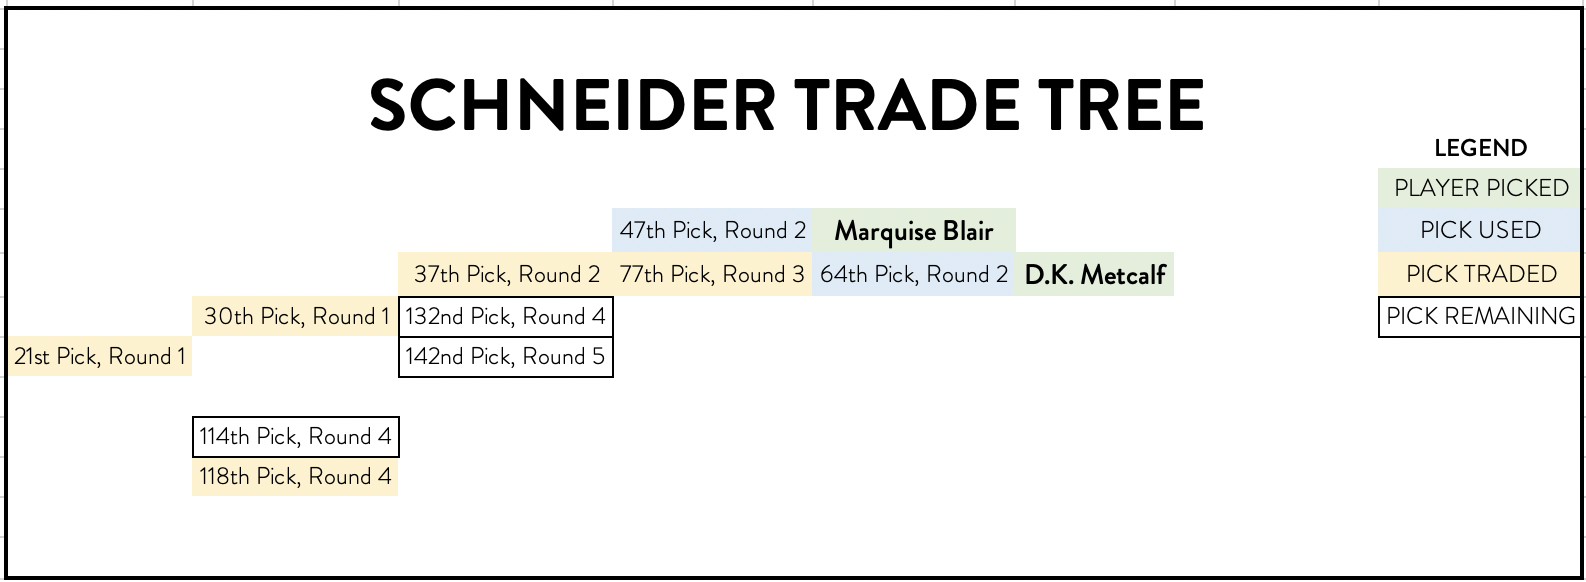 Schneider trade tree showing how he turned the 21st pick into Marquise Blair, D.K. Metcalf, and three additional picks for day three in the draft